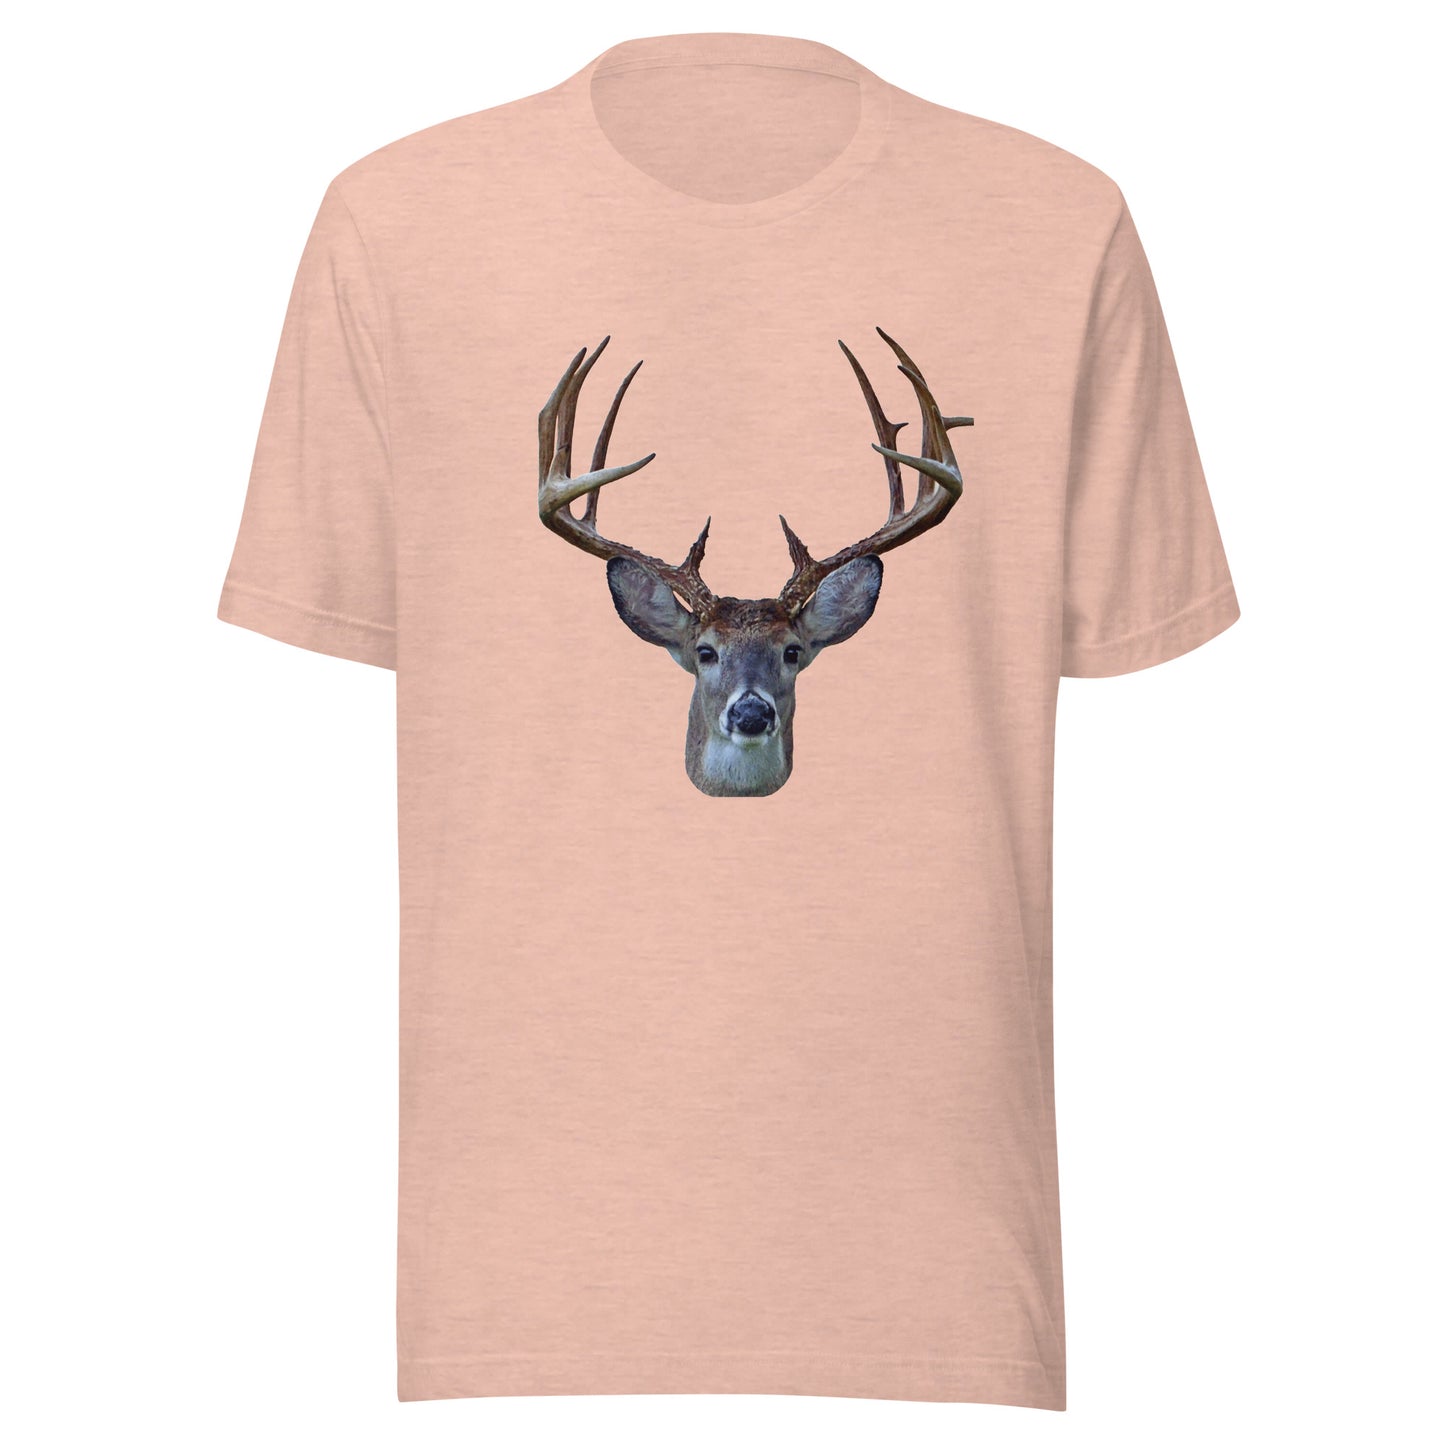 Women and Men's (Unisex) T-Shirt printed with  a White-Tailed Deer